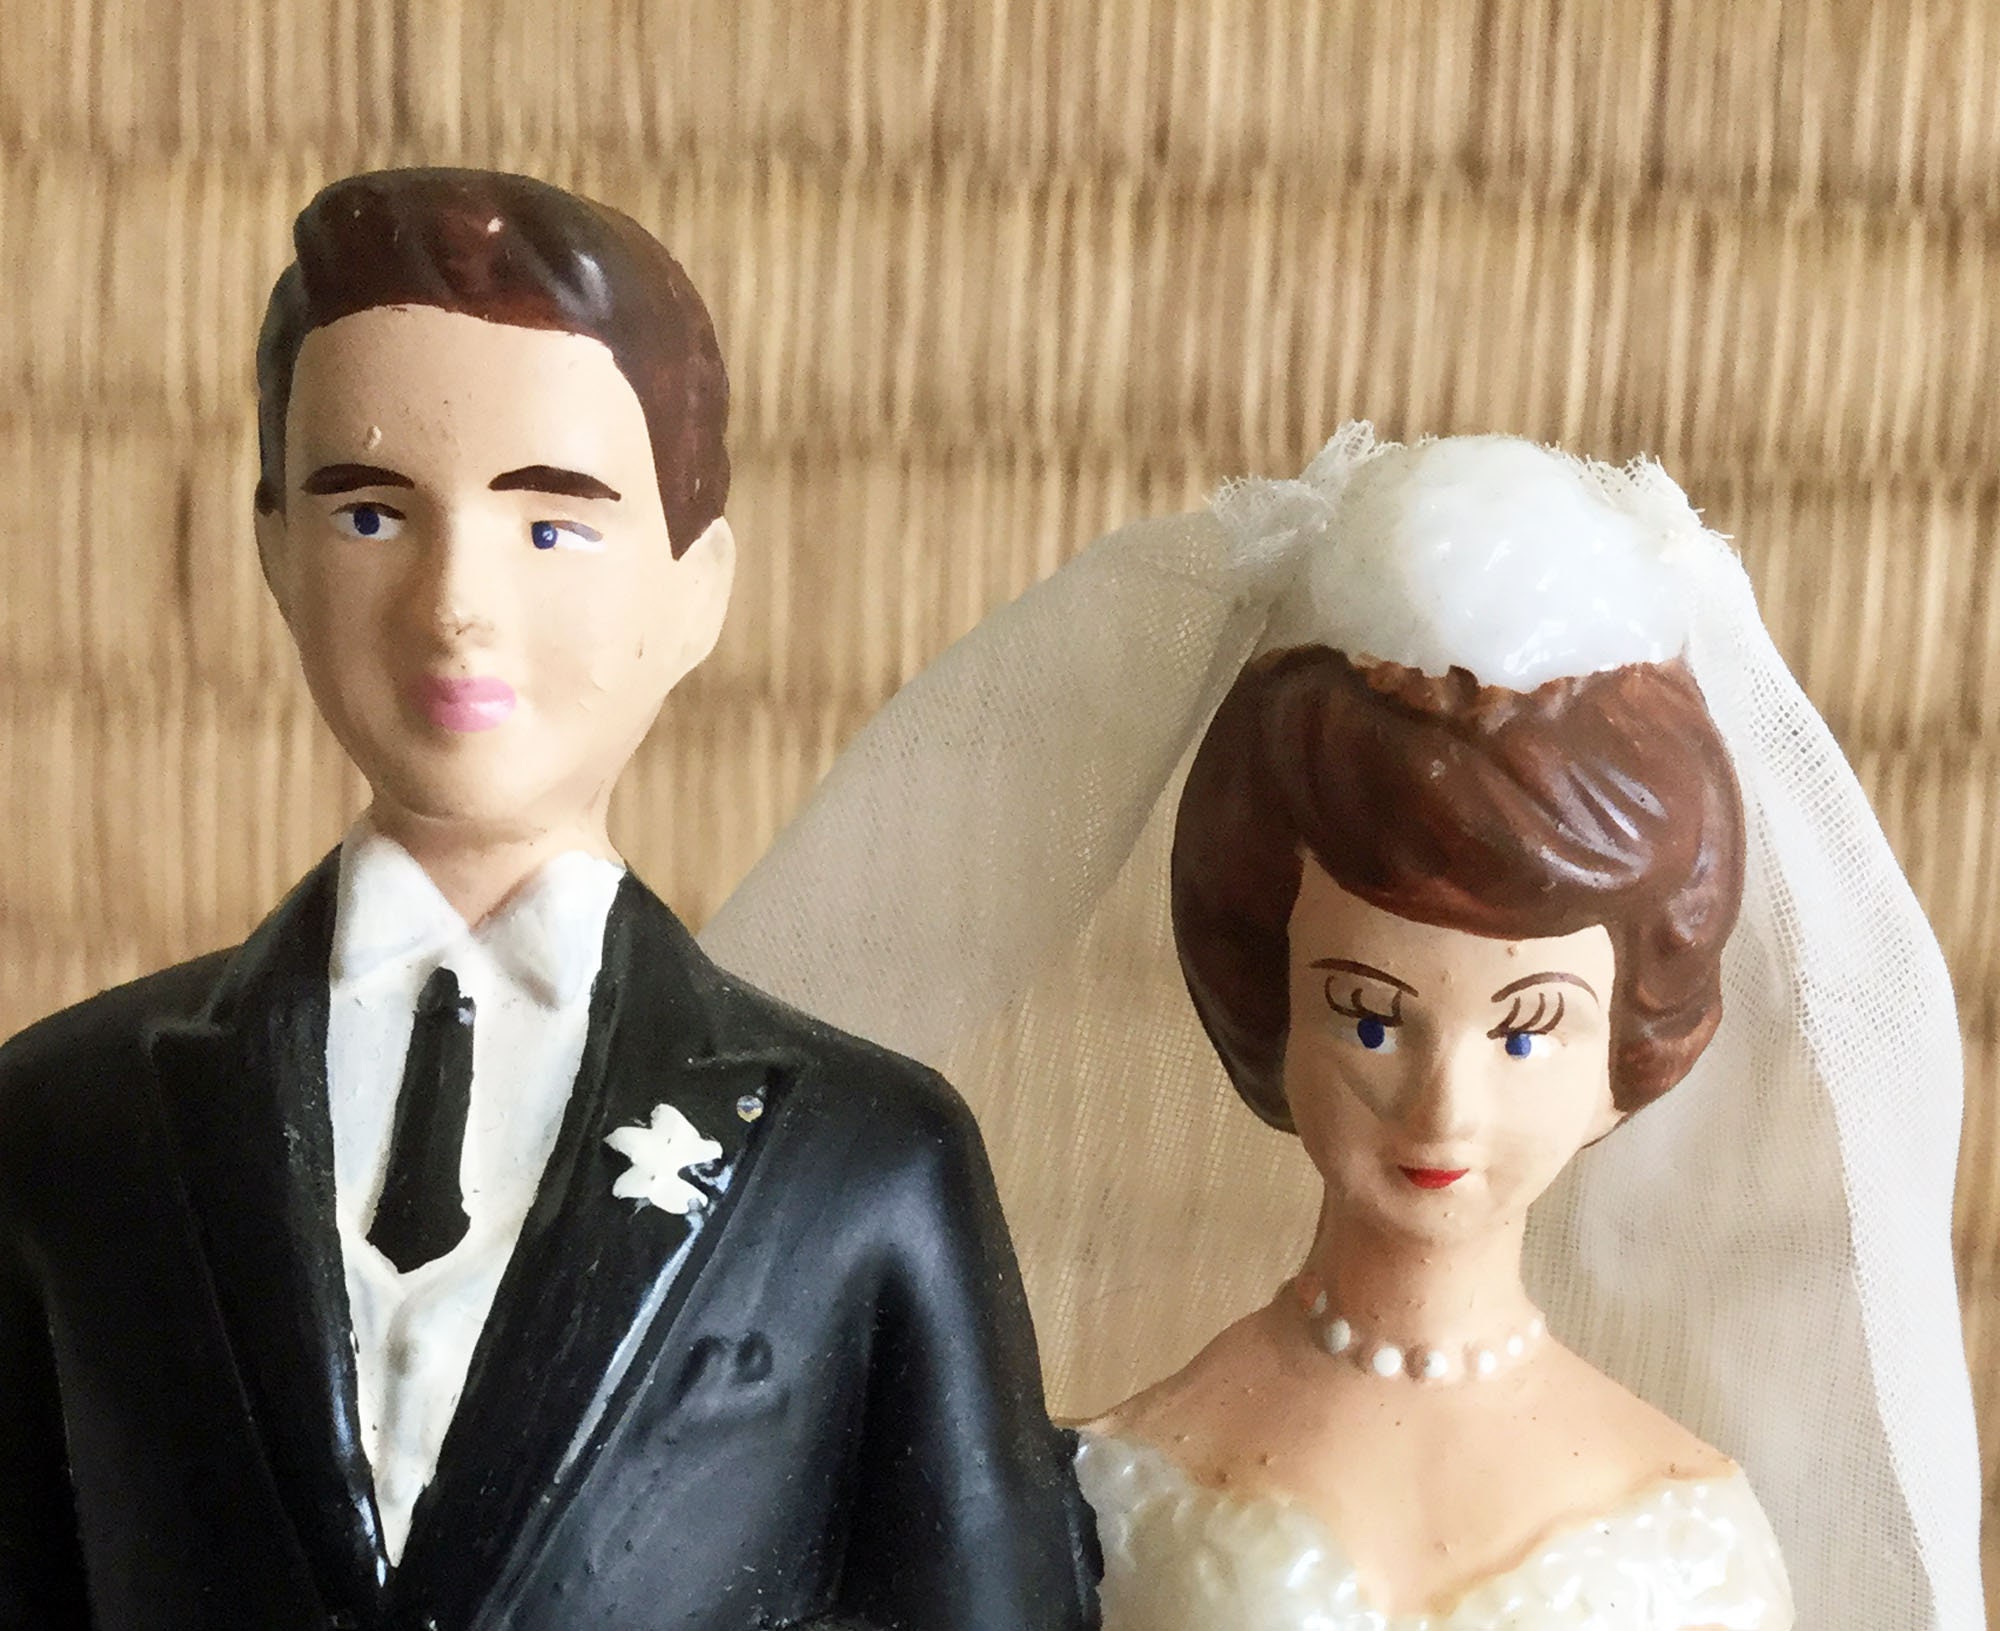 Vintage Bride and Groom Cake Topper Tux Top hat White Gown Figurine 8.75" Tall 